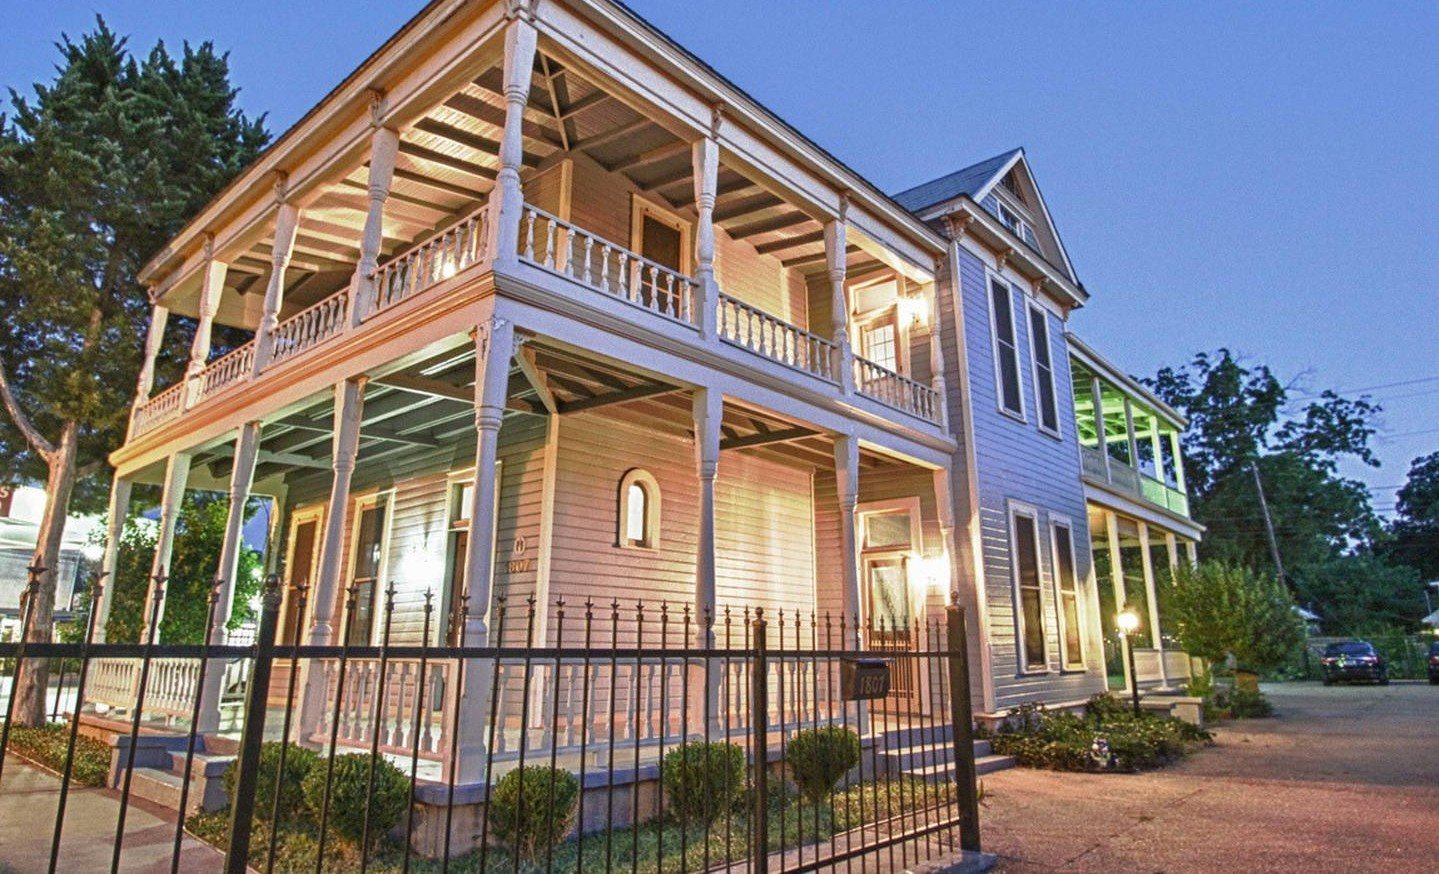 You’ll get a taste of Texas staying in our elegant Victorian mansion